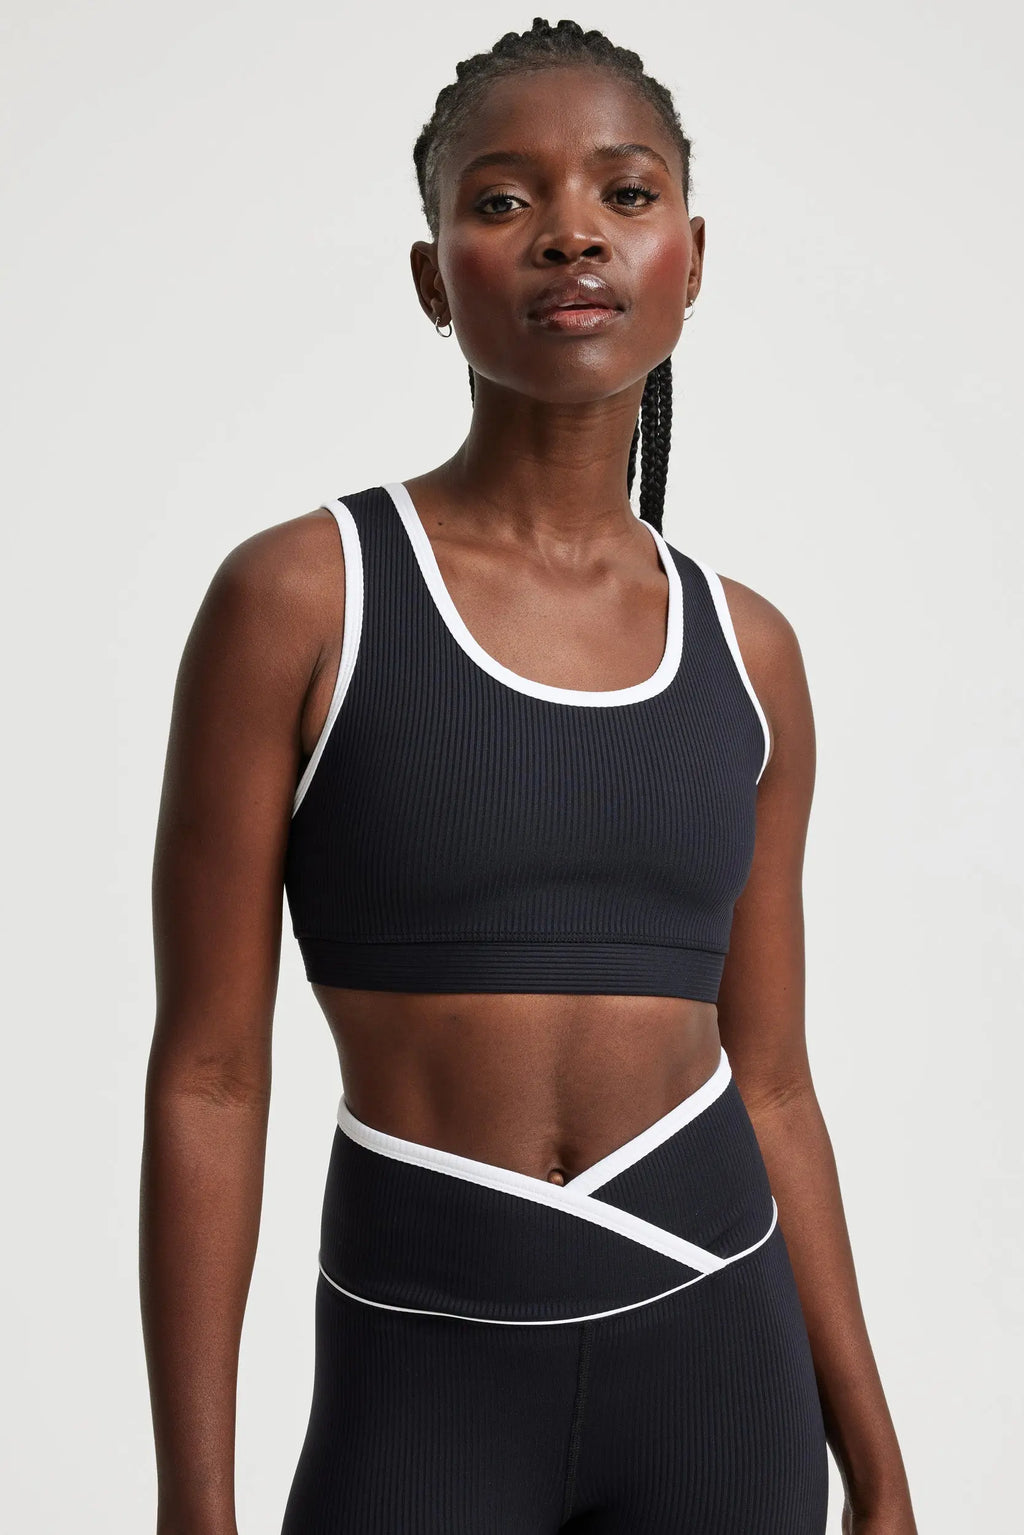 Year Of Ours Ribbed Mock Neck Sports Bra